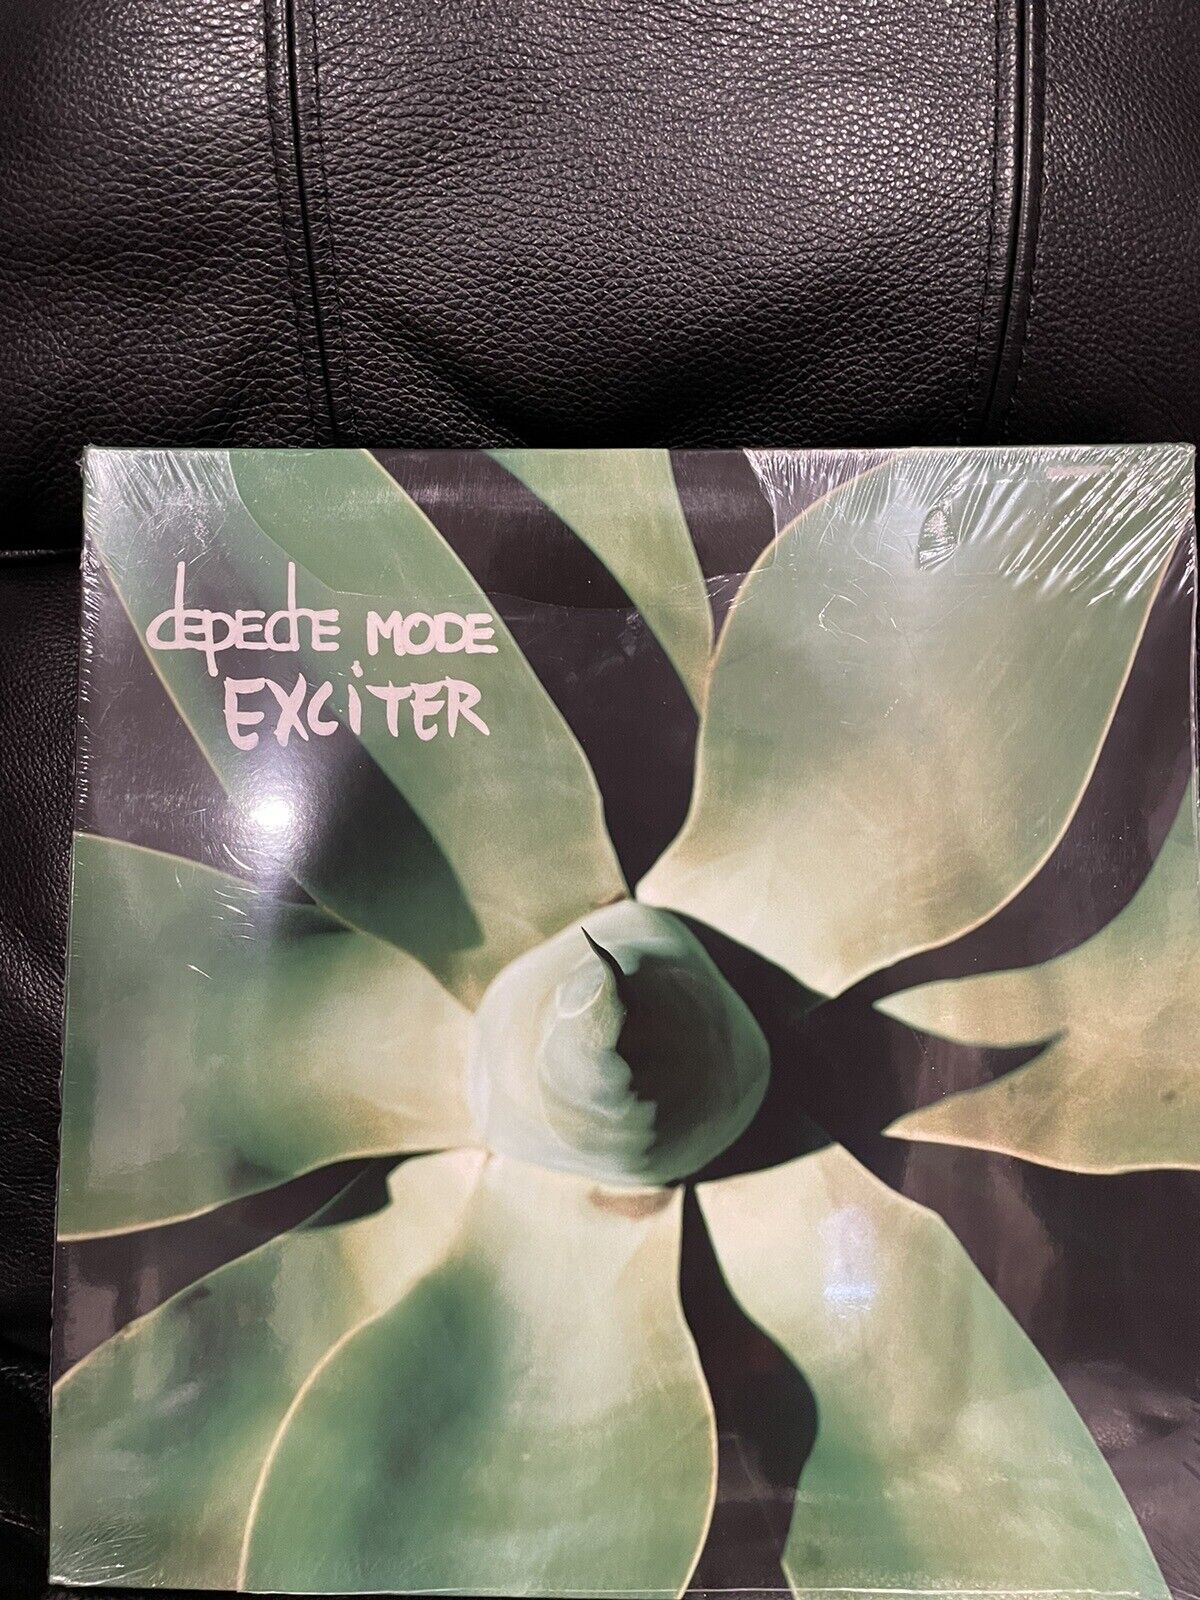 Exciter by Depeche Mode (This Reissue Record, 2014)